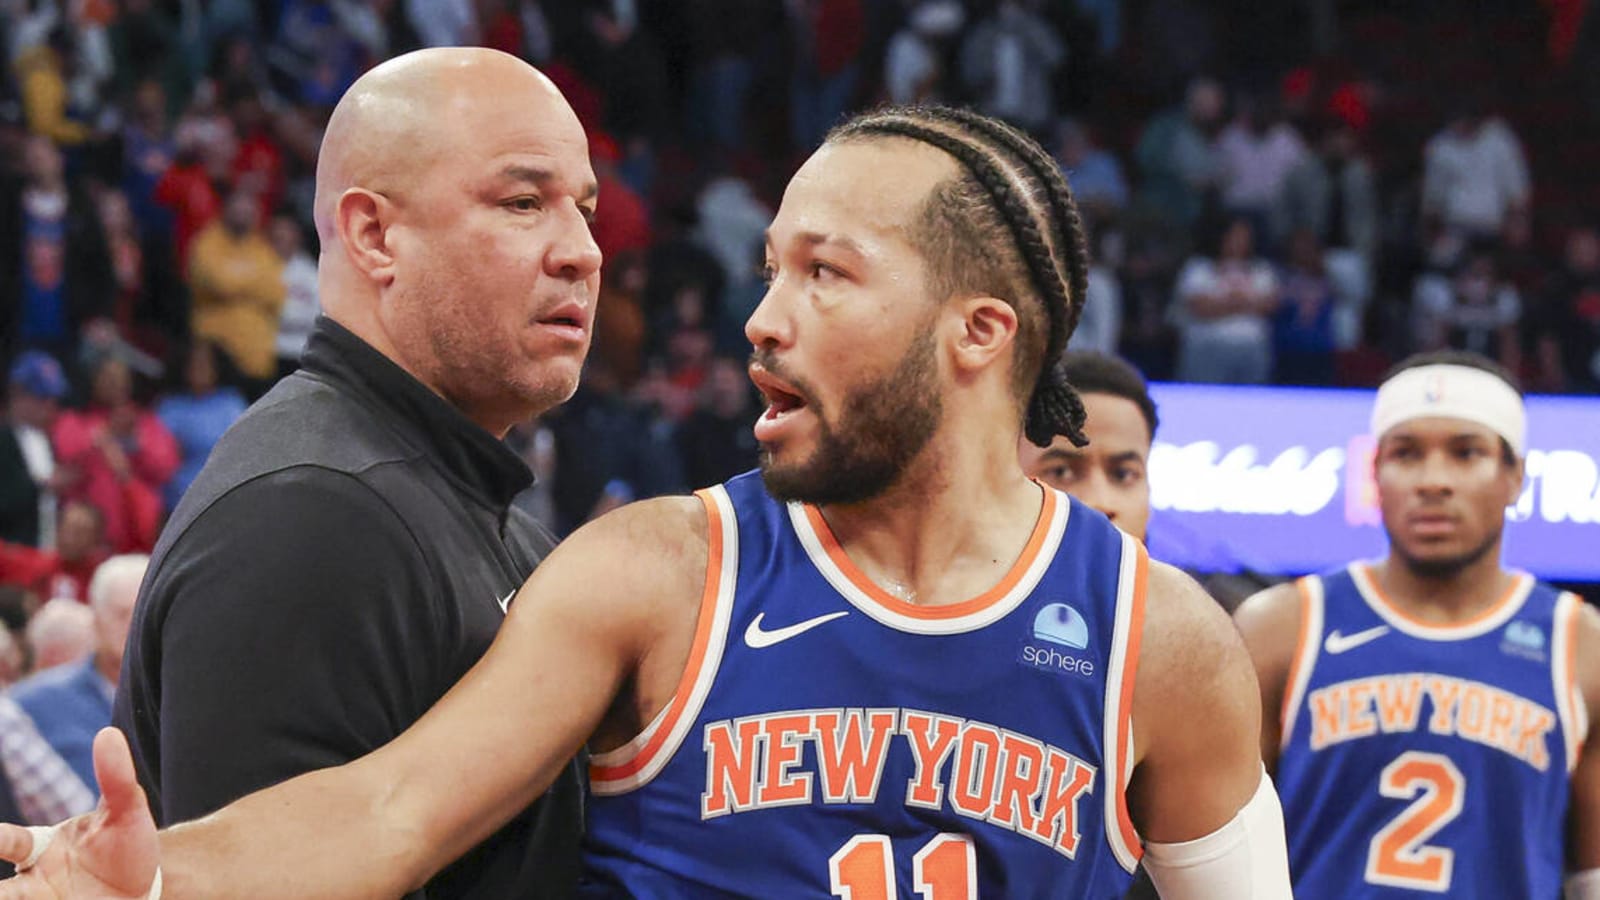 Officials admit mistake on last-second call in Knicks-Rockets game